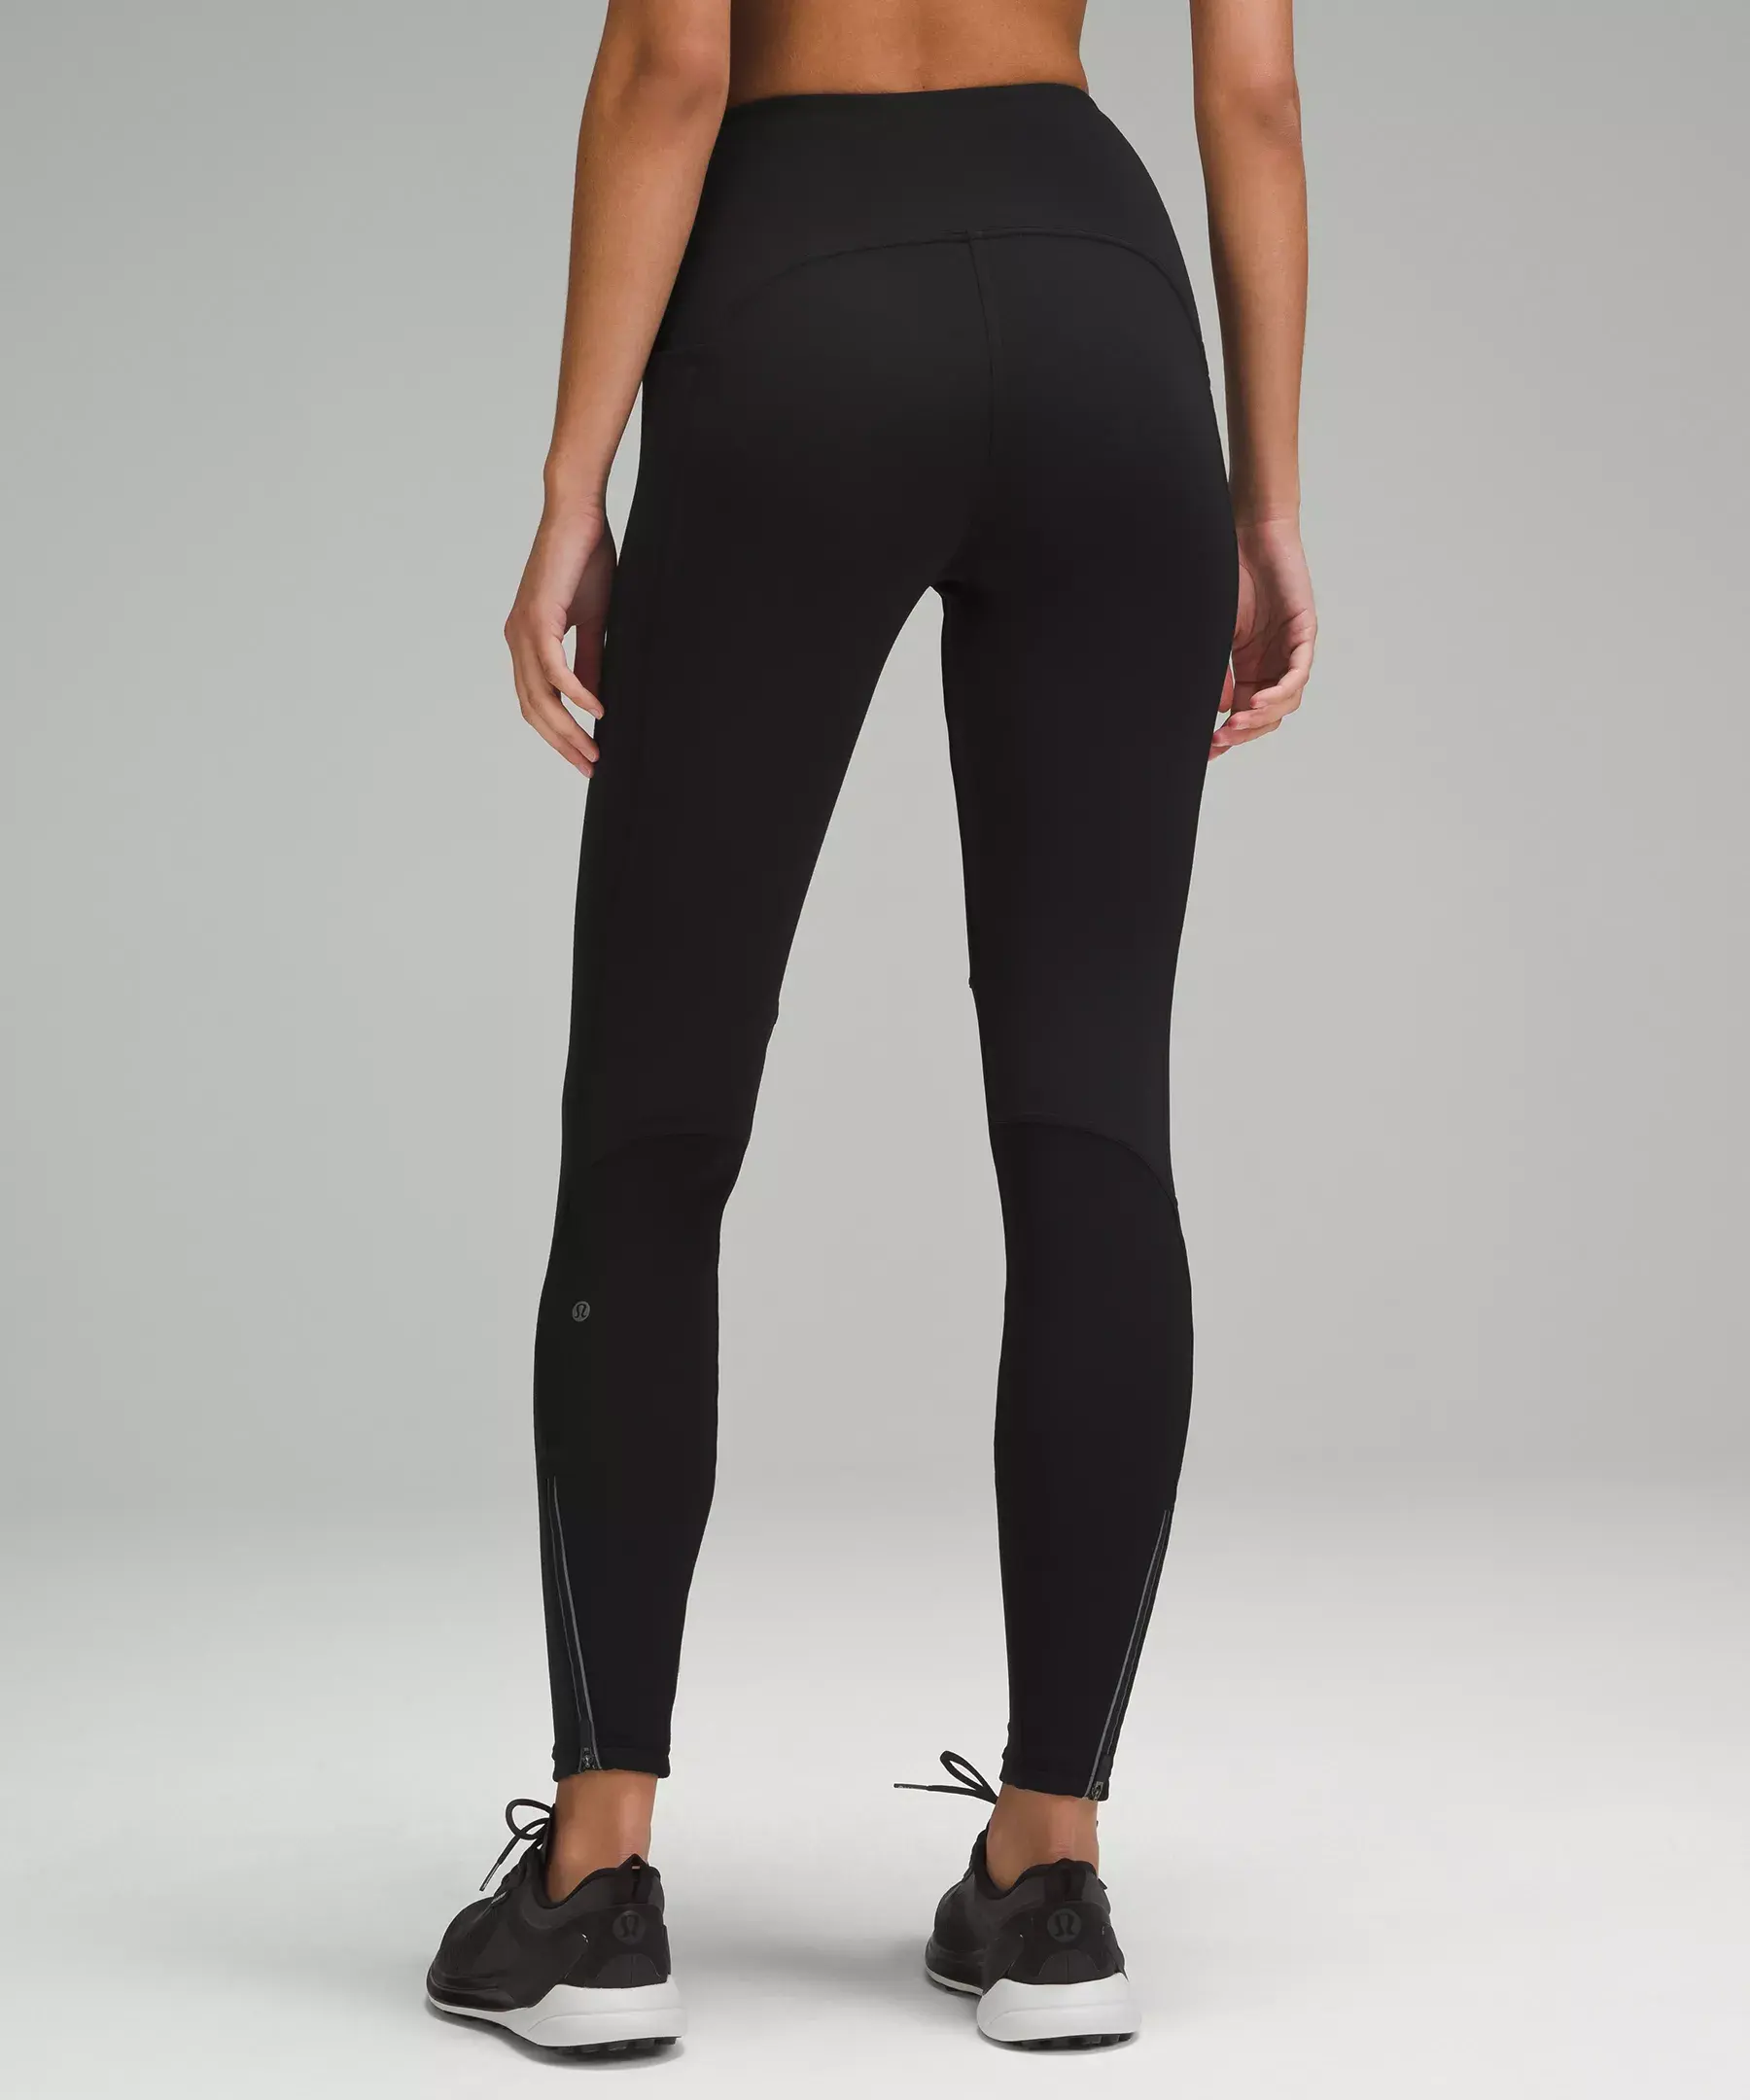 Lululemon Cold Weather High-Rise Running Tight 28". 3